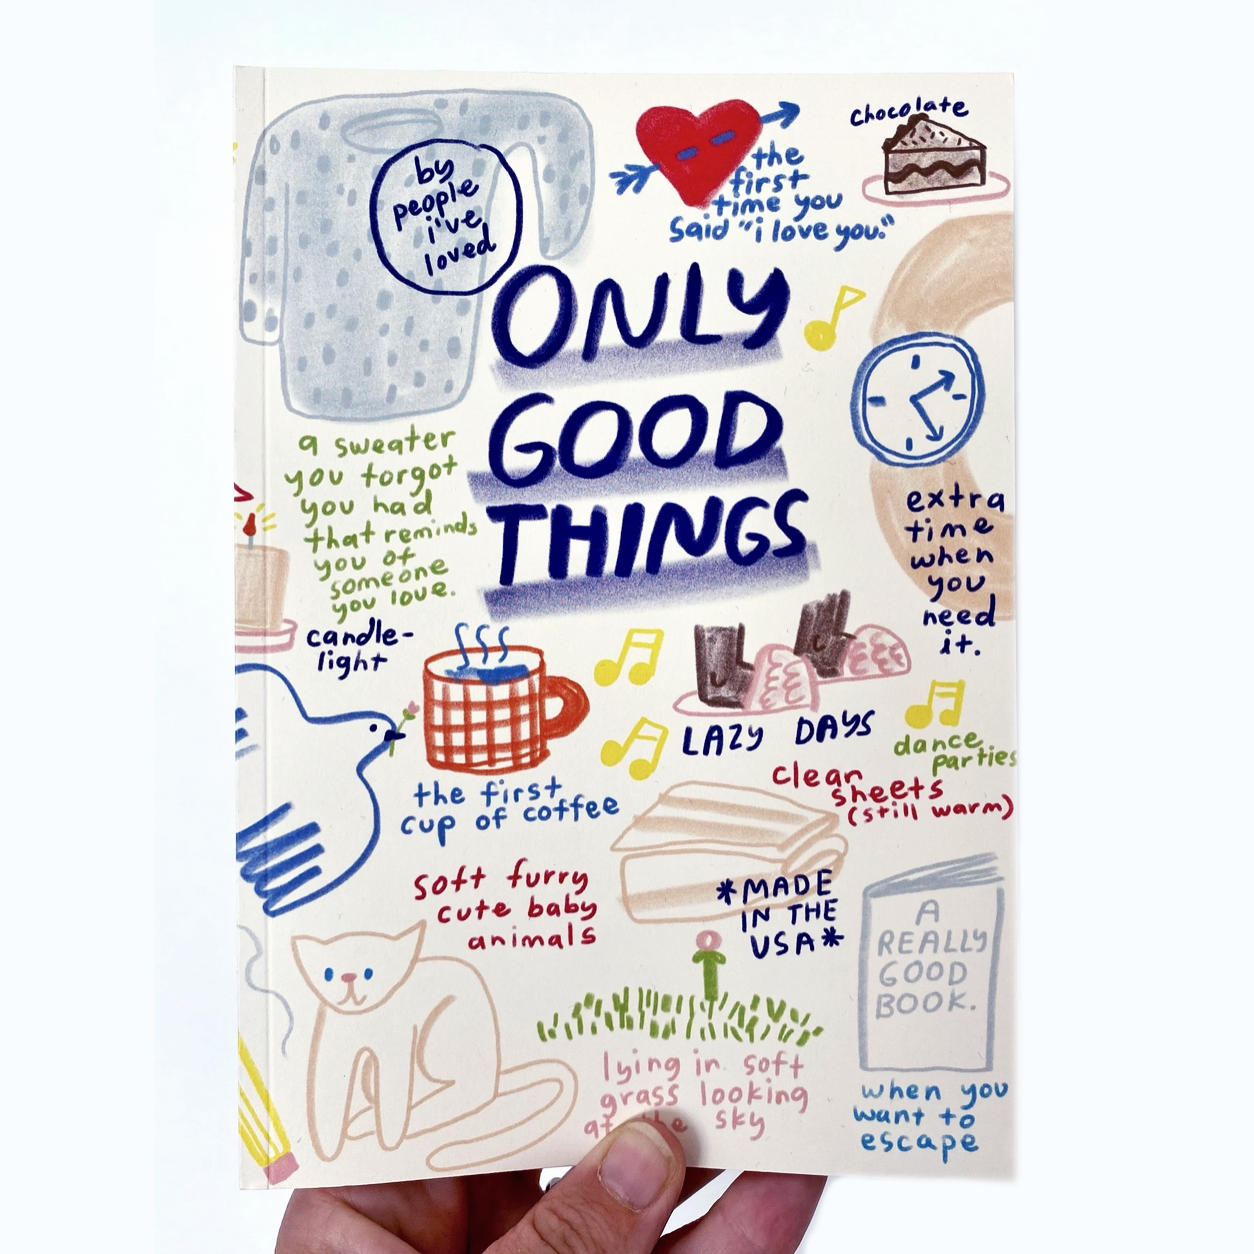 People I've Loved | Only Good Things Notebook | Prelude and Dawn | Los Angeles, CA